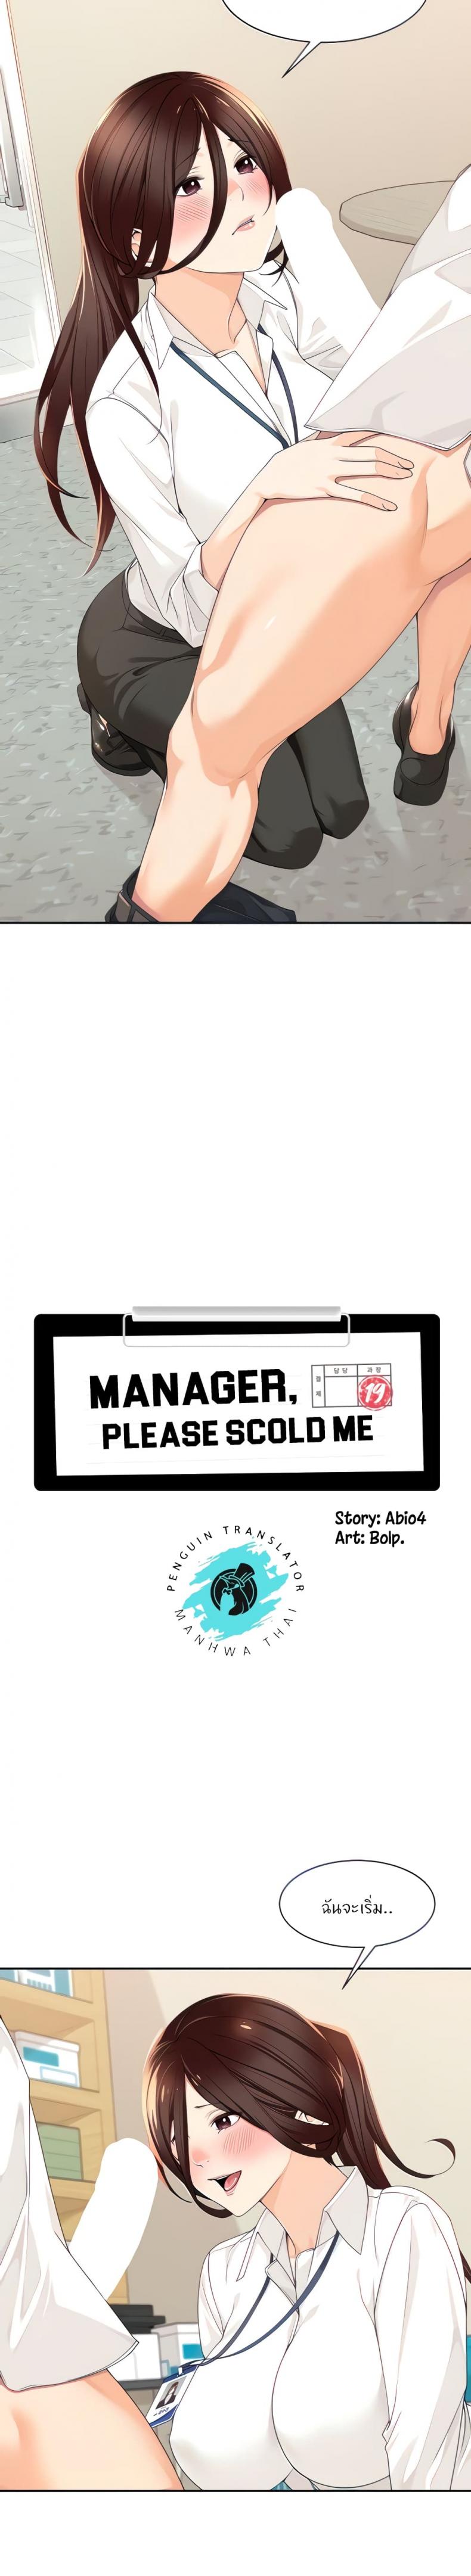 Manager, Please Scold Me 6 ภาพที่ 3